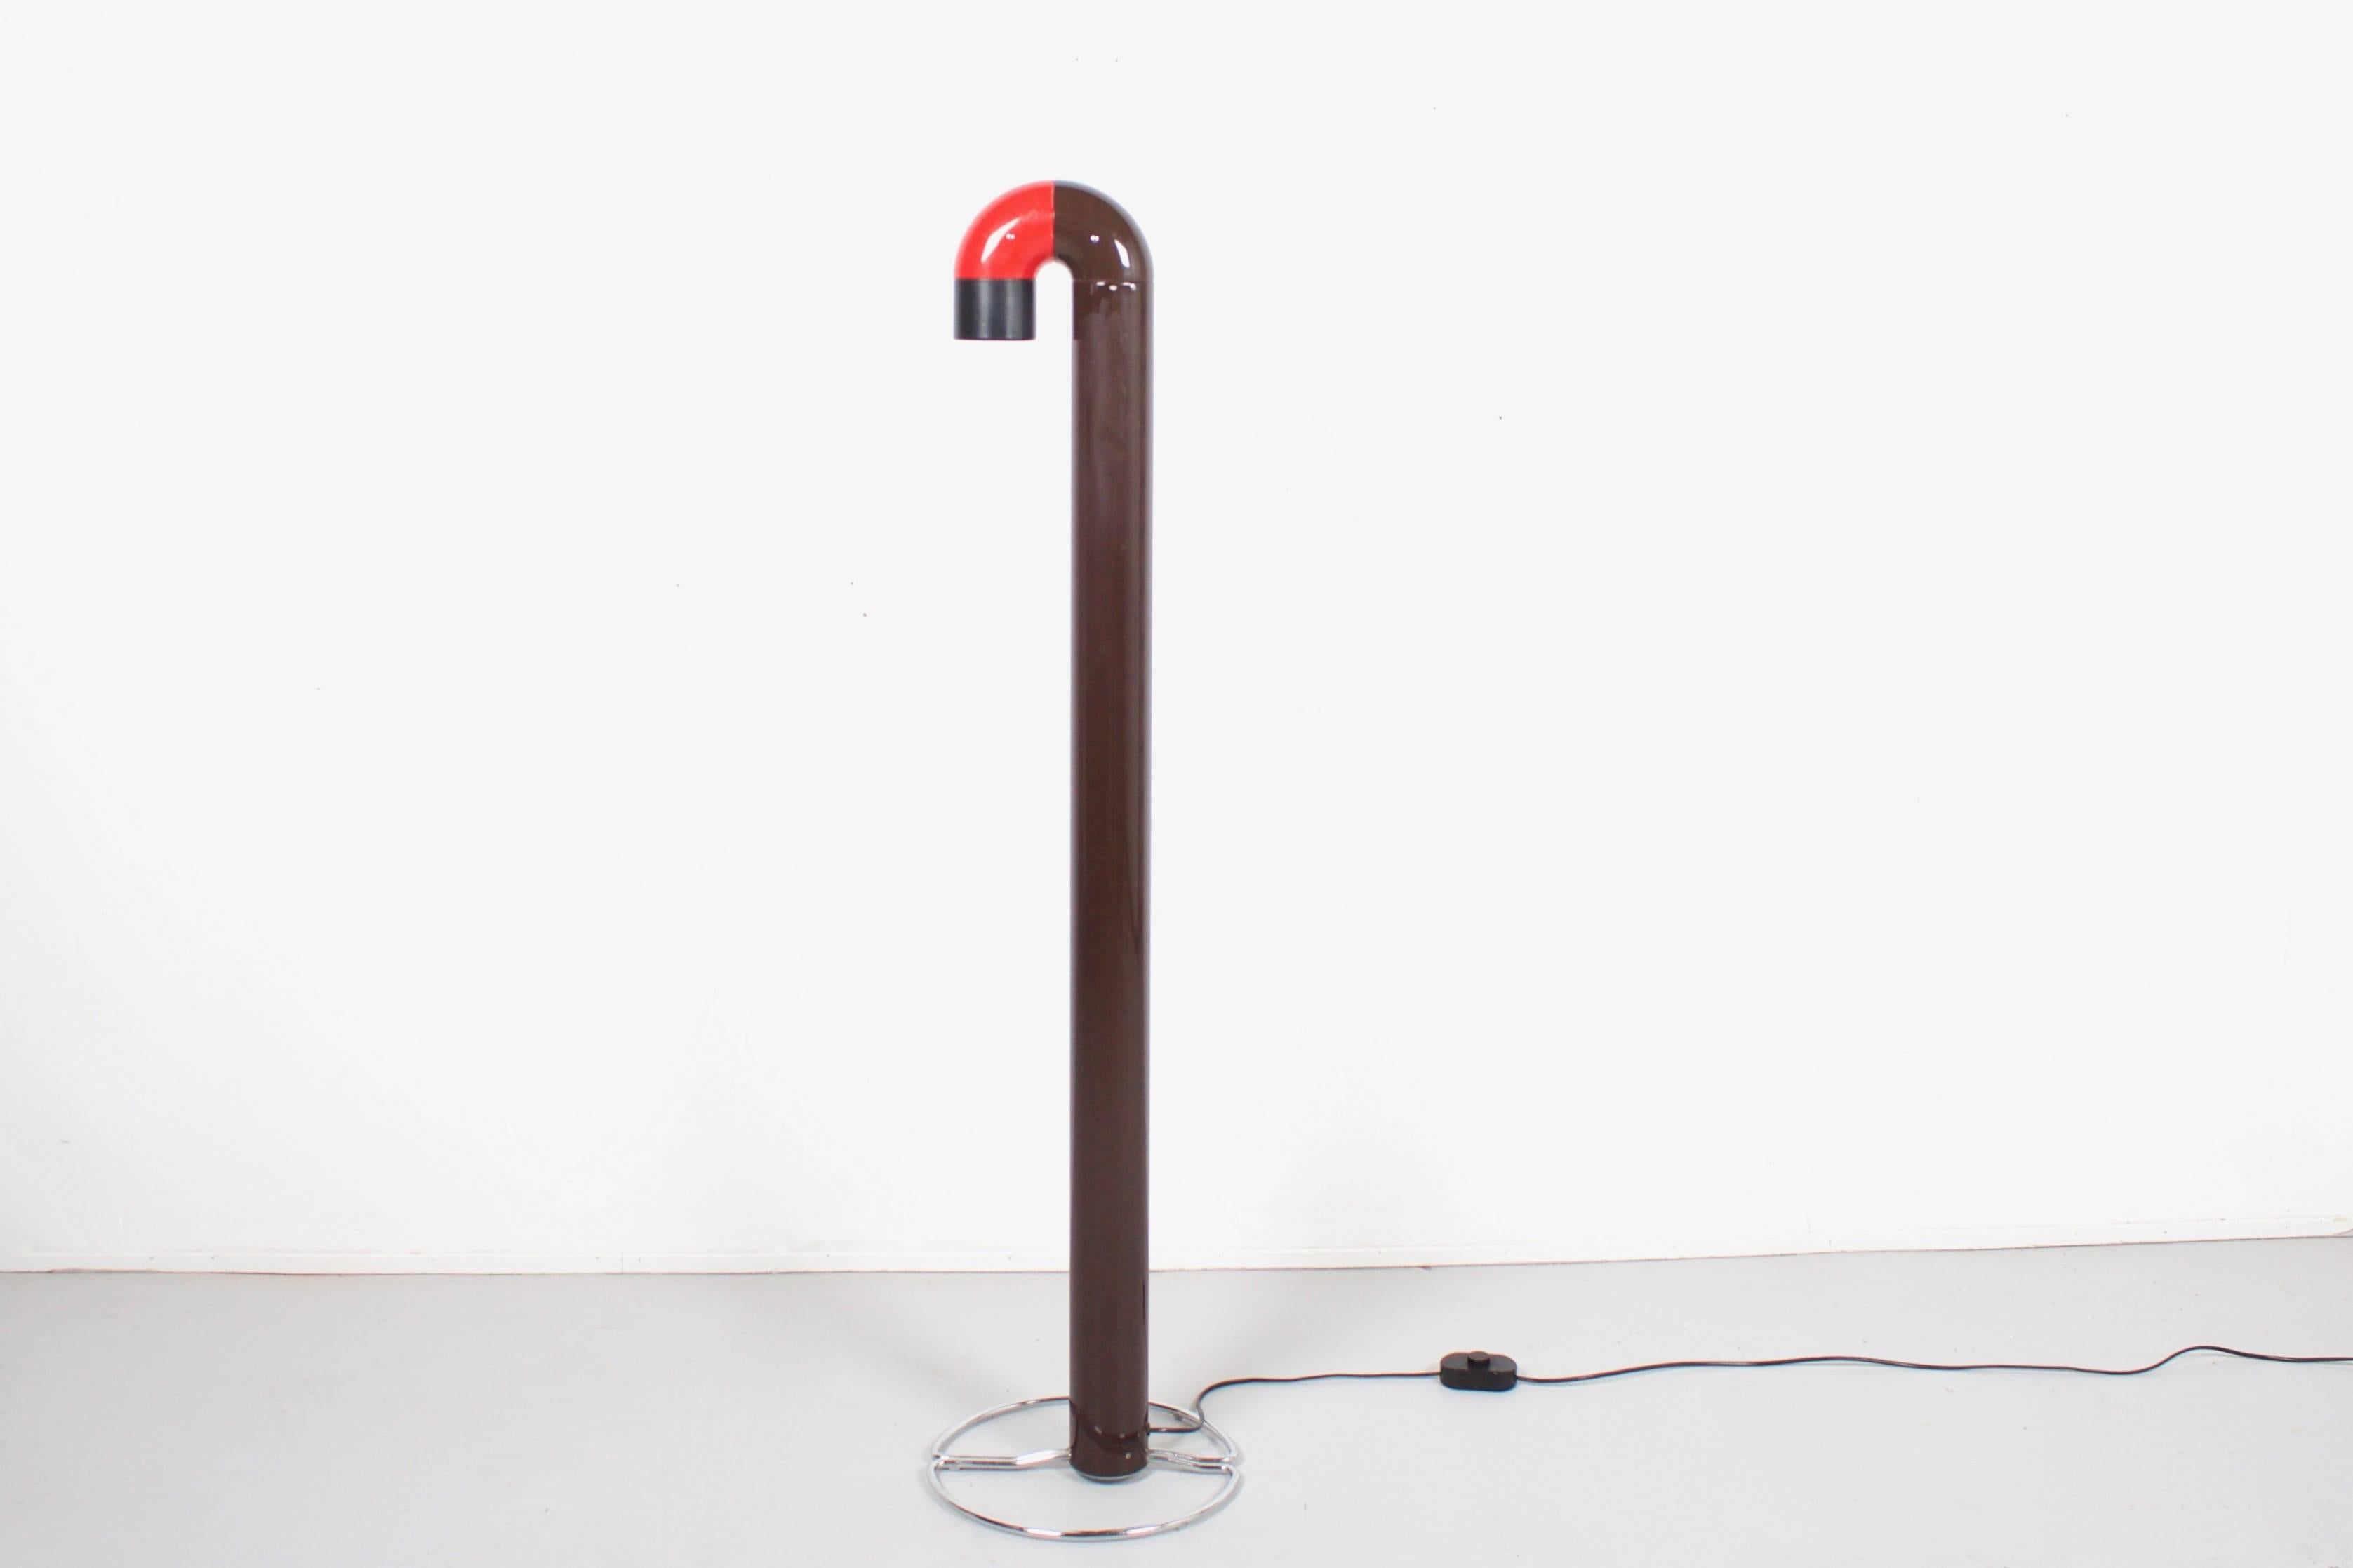 Beautiful Space Age floor lamp by Kwok Hoi Chan in good condition.

Manufactured by the British lighting company Concord in the 1960s. 

The top part of the lamp is adjustable and has a red and brown color scheme. 

It can be used as a reading lamp